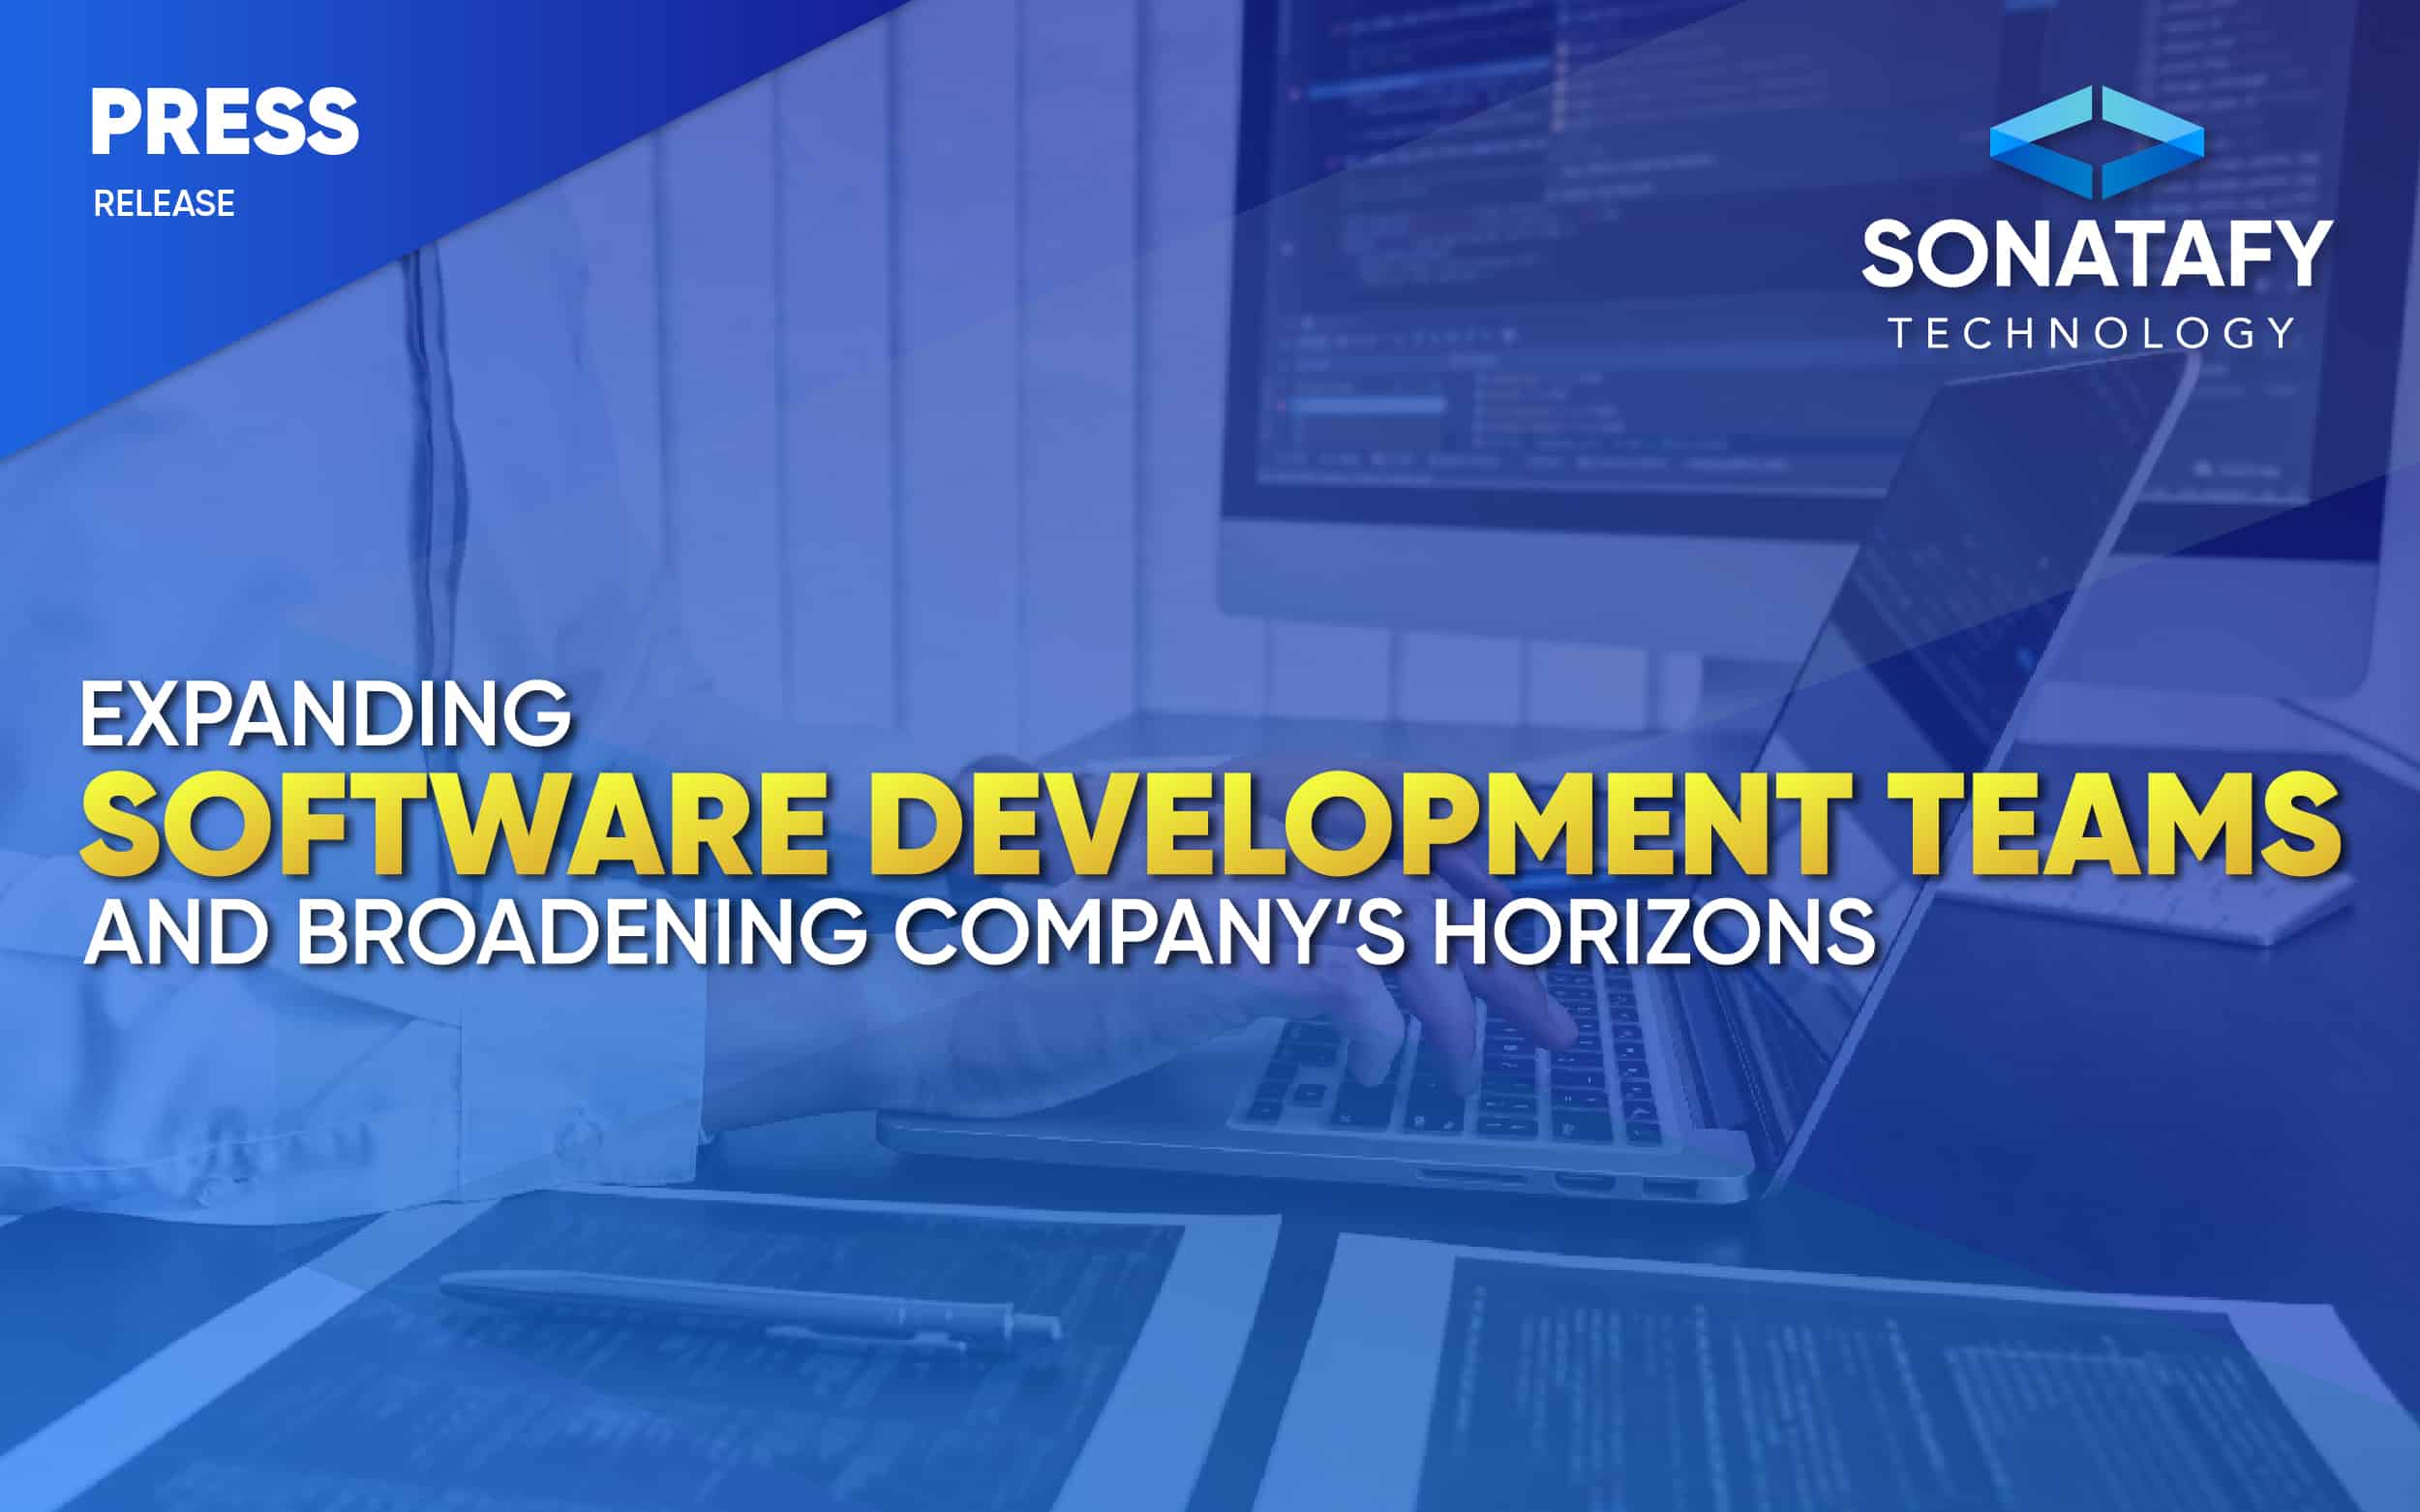 Expanding Software Development Teams And Broadening Company’s Horizons